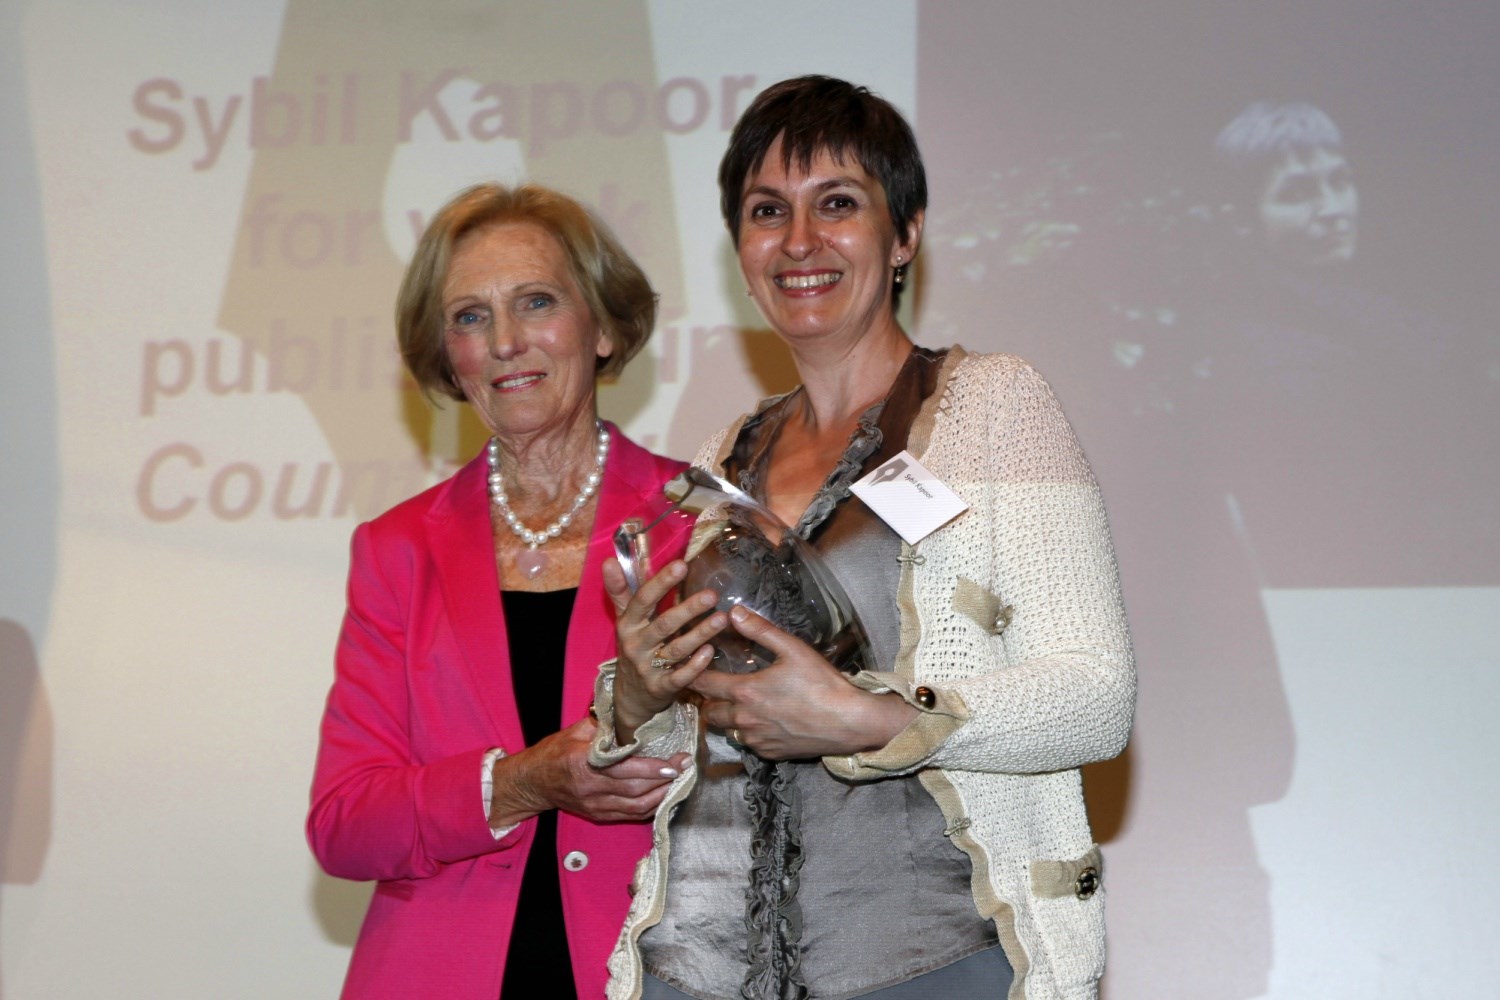 Sybil Kapoor receiving her award from Mary Berry